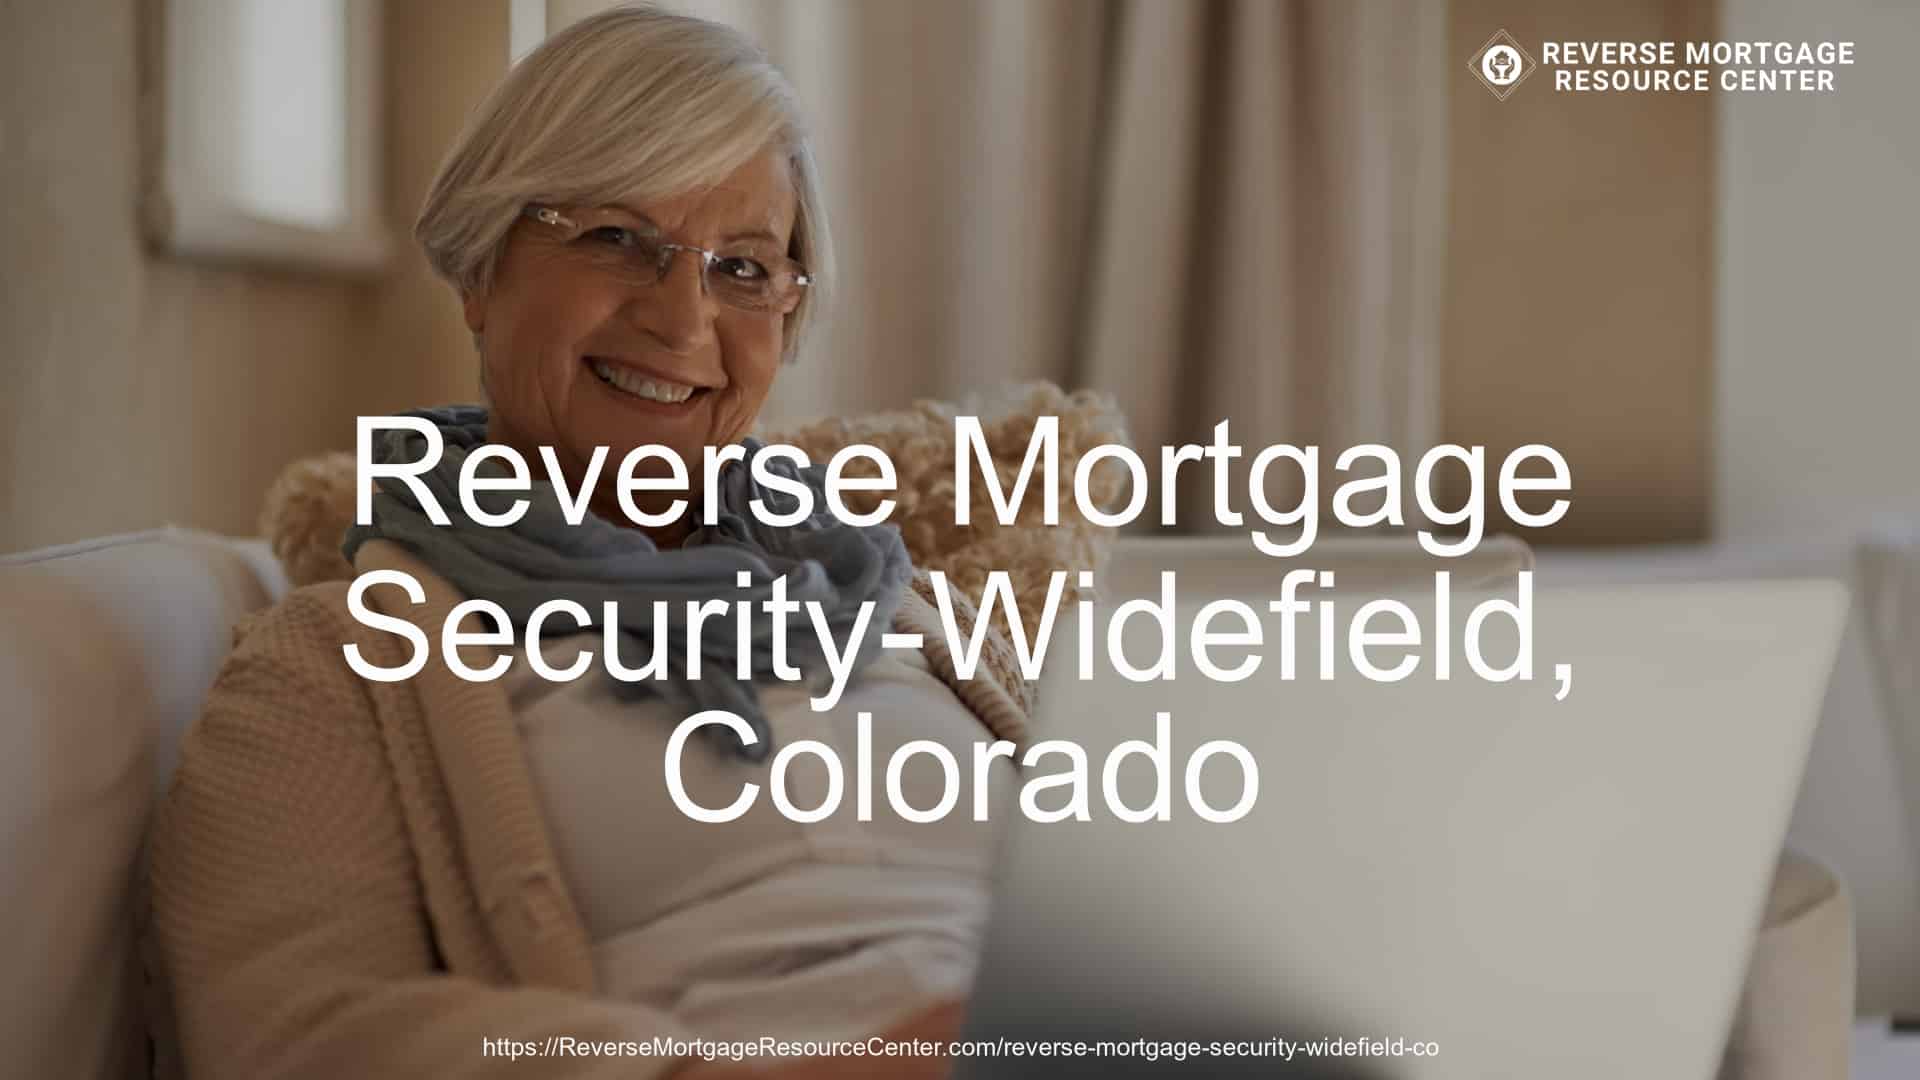 Reverse Mortgage Loans in Security-Widefield Colorado